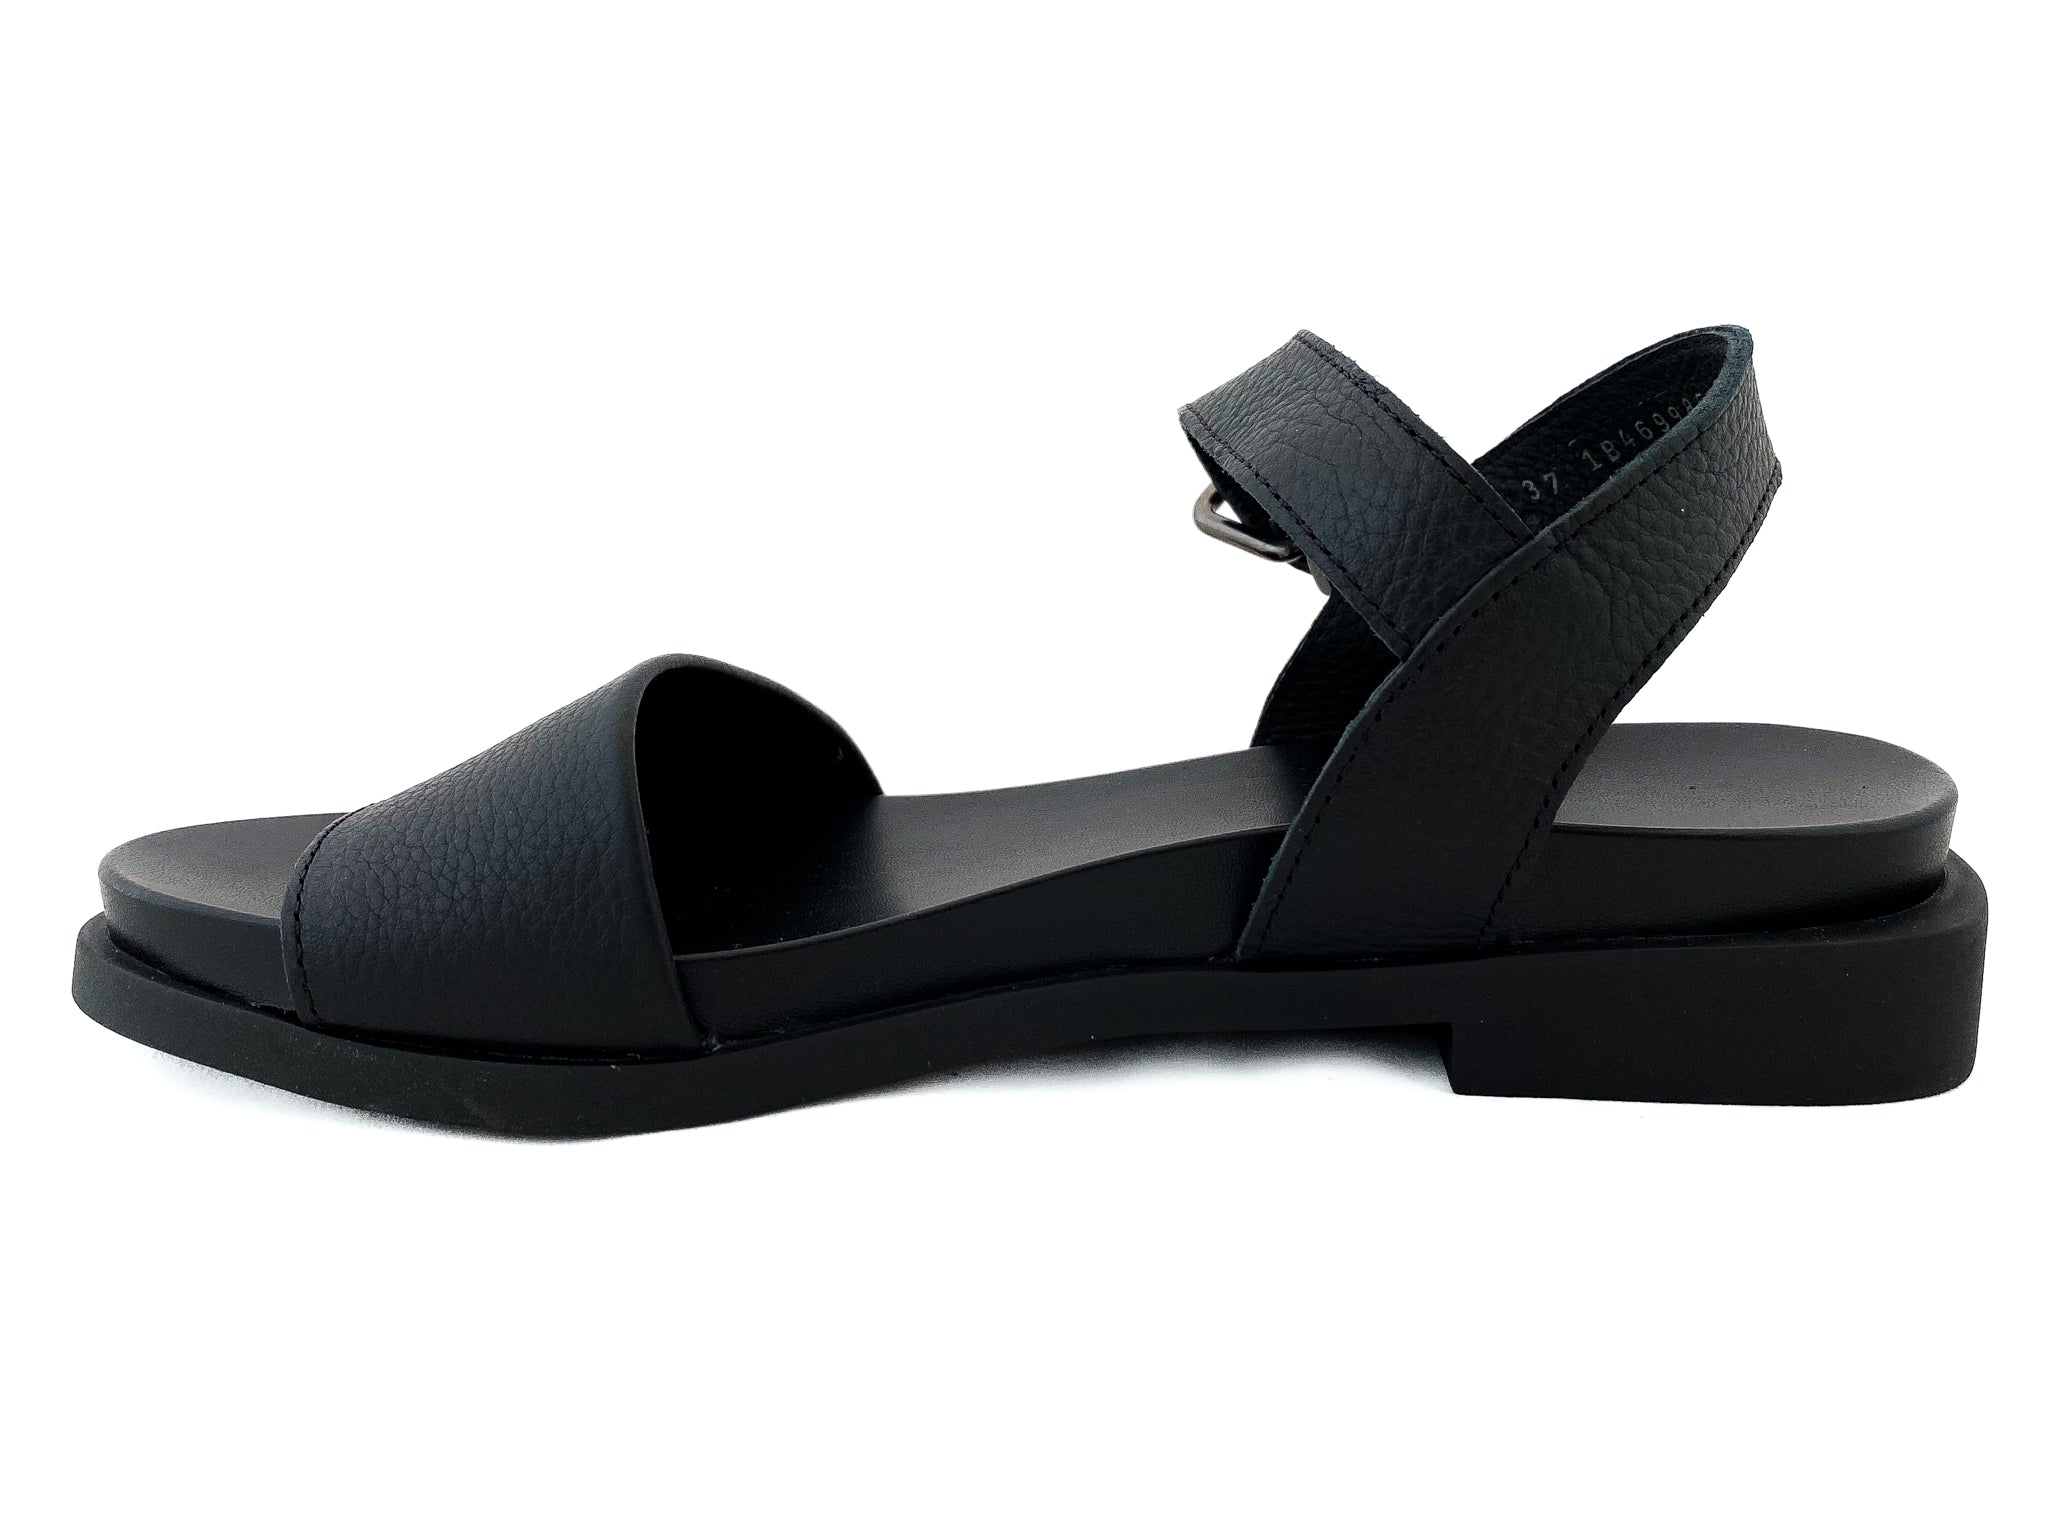 Women's mules Makkho shoes - 3 available colors from 35 to 42 - arche